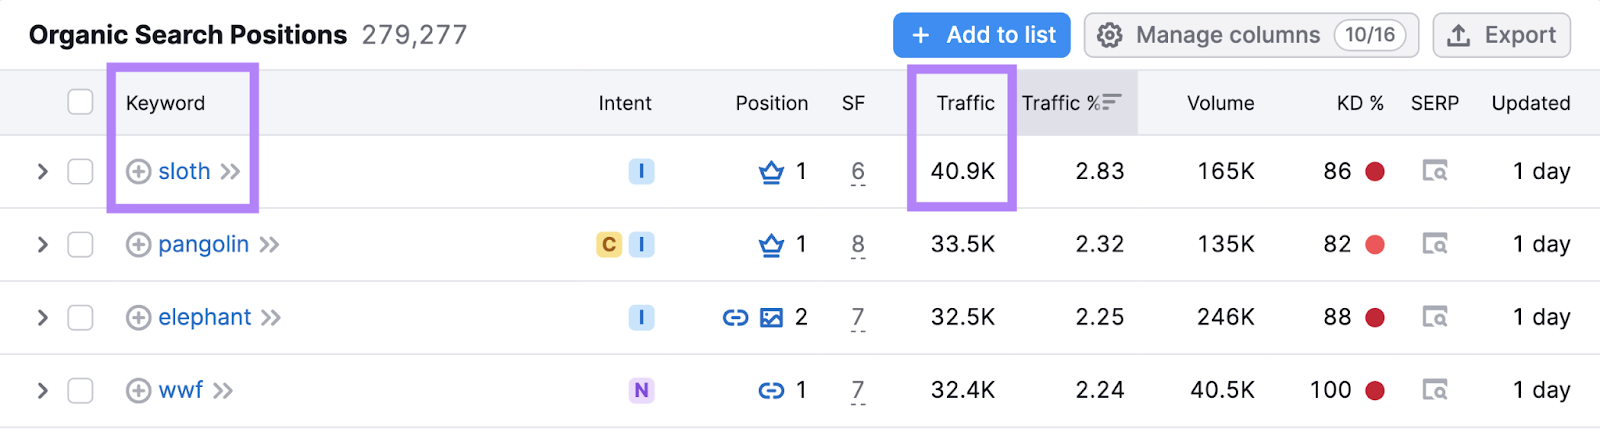 keyword and traffic column highlighted for sloth search term